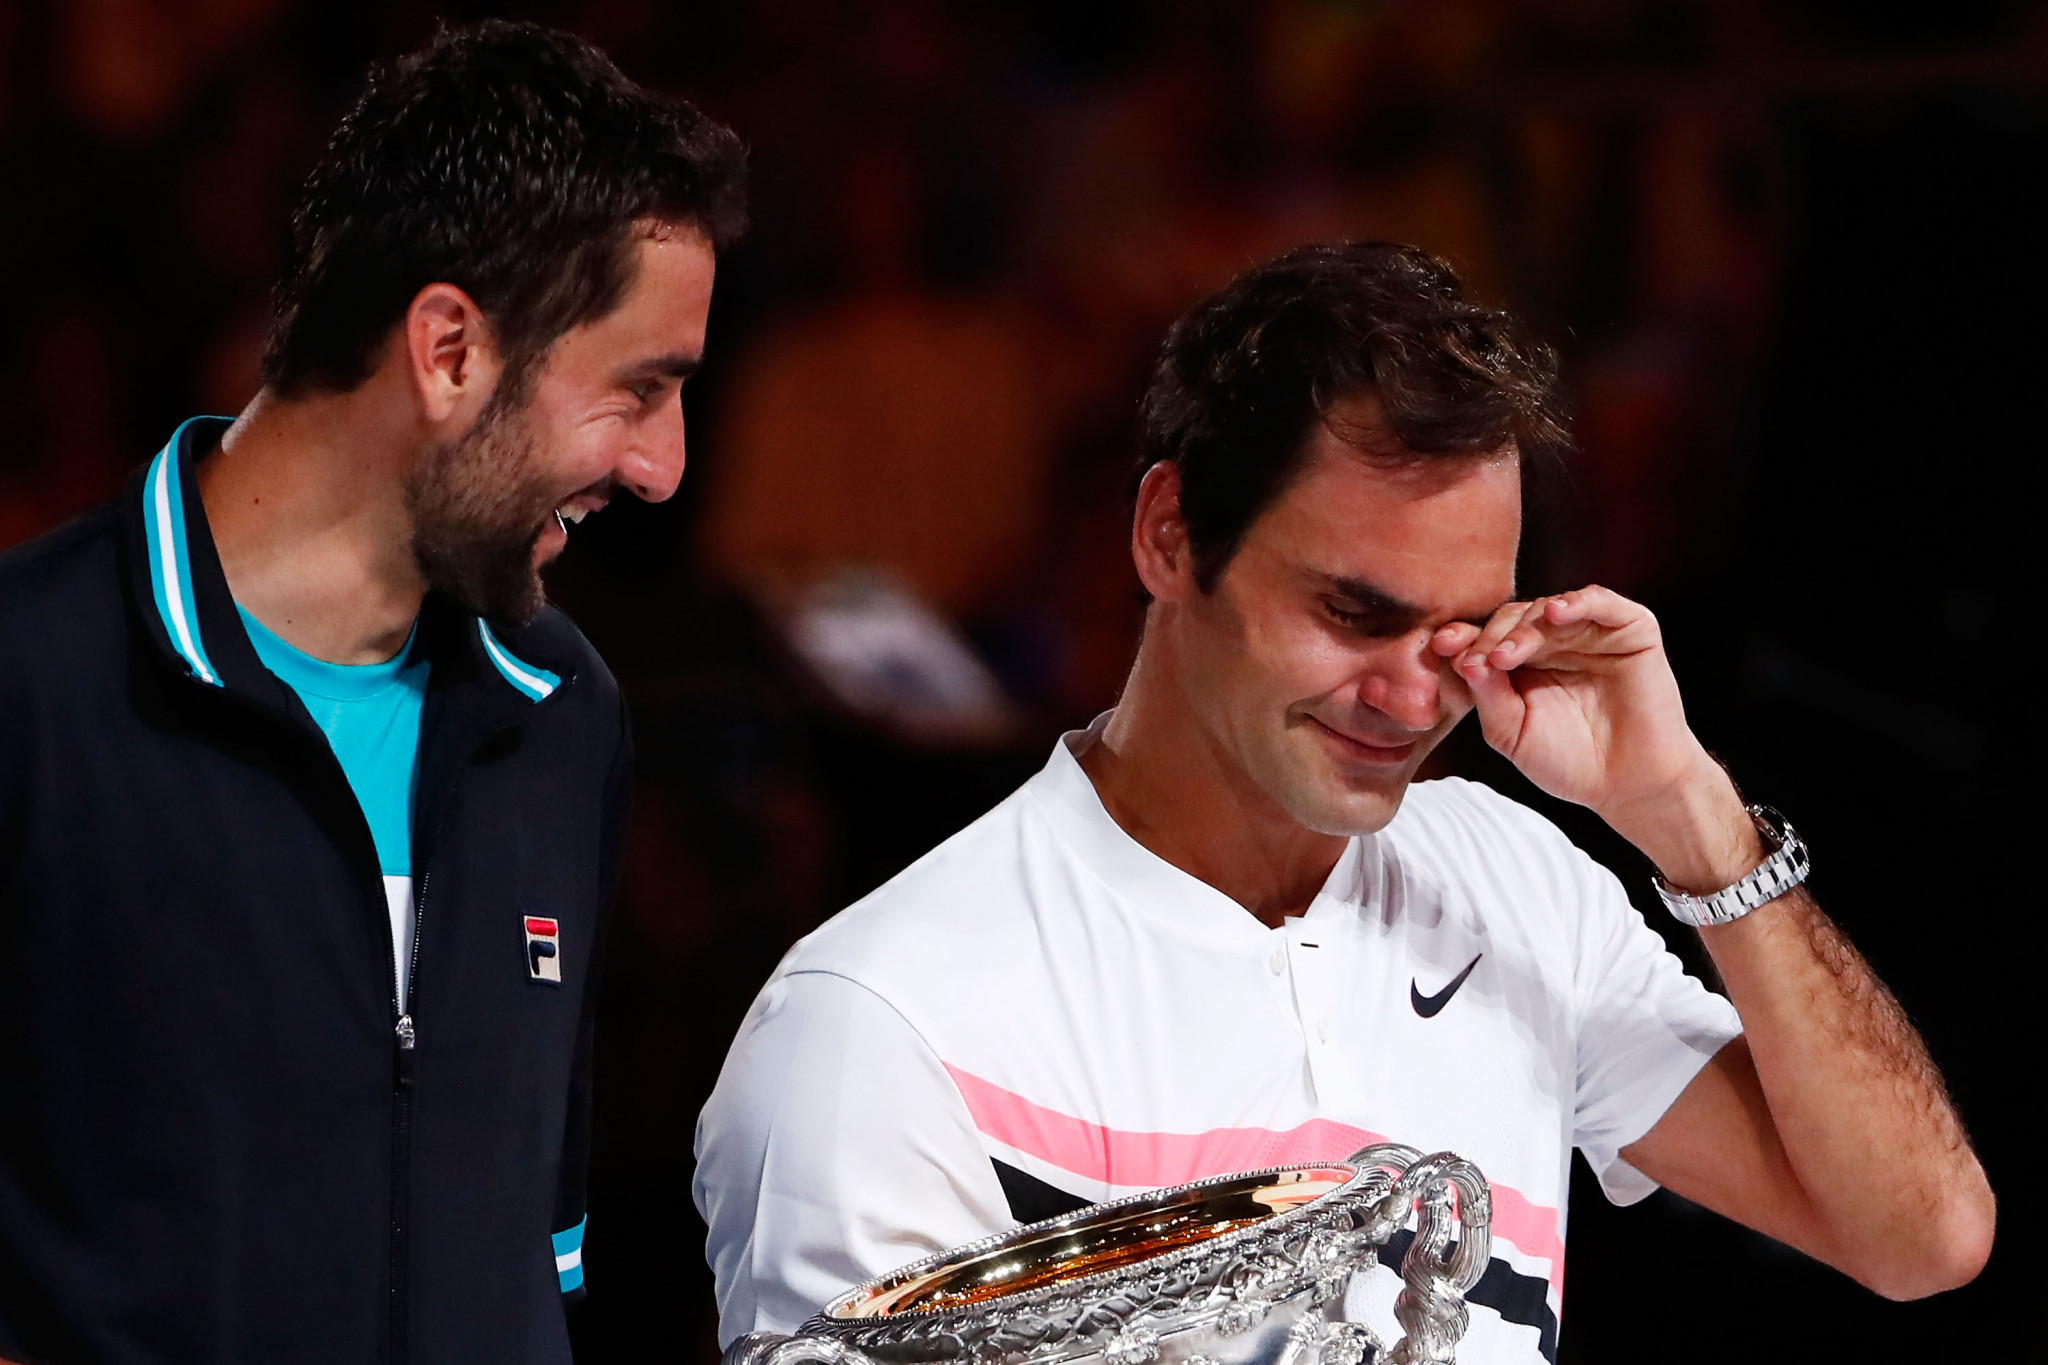 Roger Federer was visibly emotional after a gruelling five-set win ©Getty Images